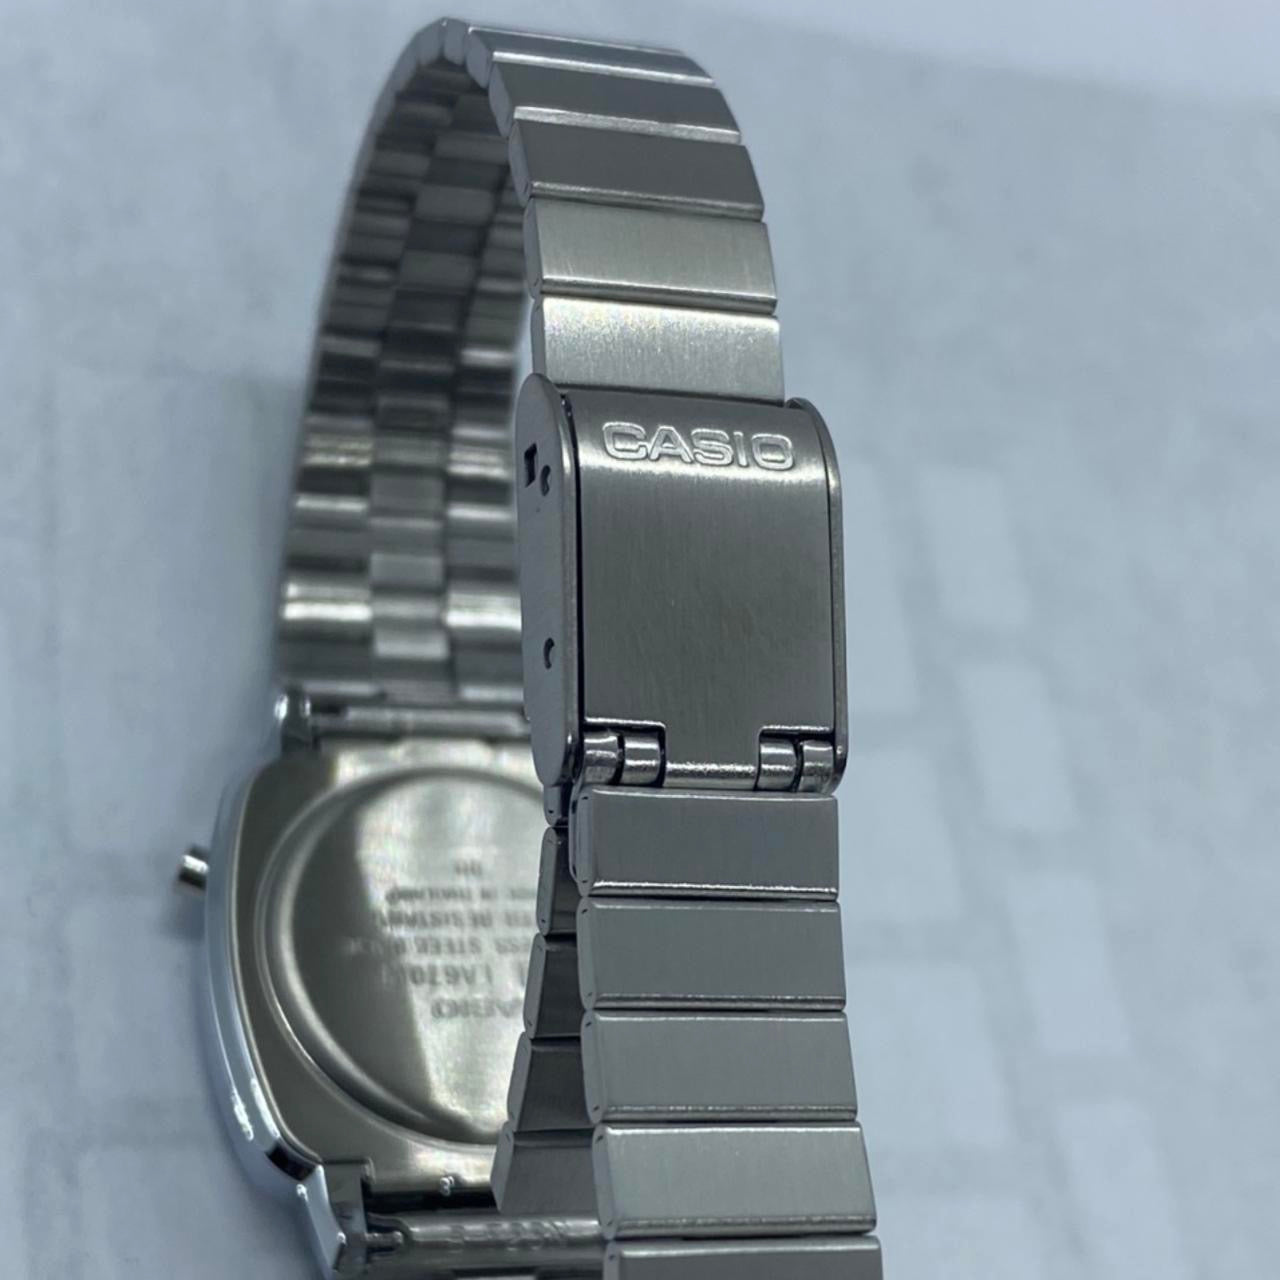 Brand new  Casio Watch for Ladies&nbsp; or for Teen&nbsp; Extra&nbsp; small size&nbsp; Size Diameter : 20mm Diameter&nbsp; This is a brand new item&nbsp; Color Gray and Black&nbsp; Water Resistant&nbsp; Wrist fits up to 7 inches LONG&nbsp;